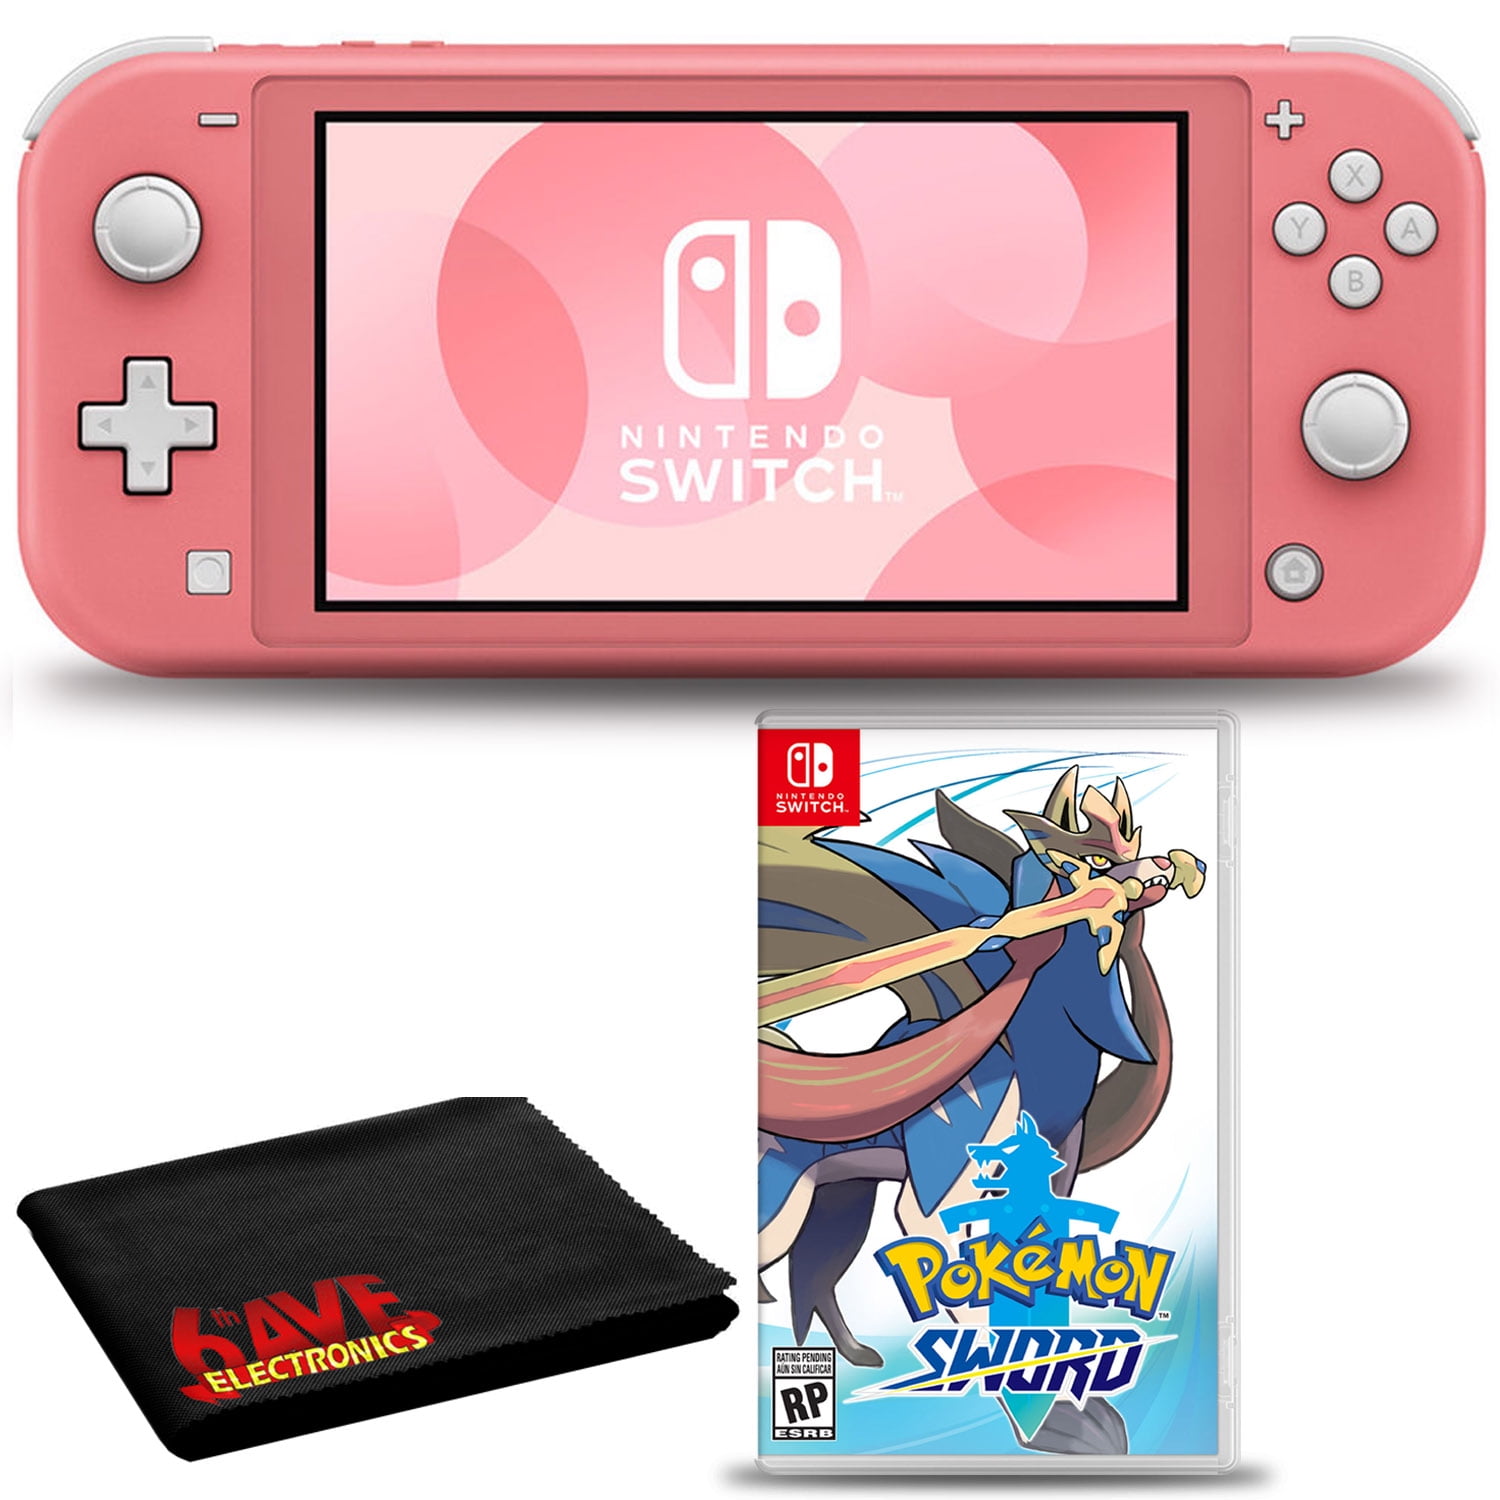 Nintendo Switch Lite (Coral) Bundle with Pokemon Sword and 6Ave Cleaning Kit